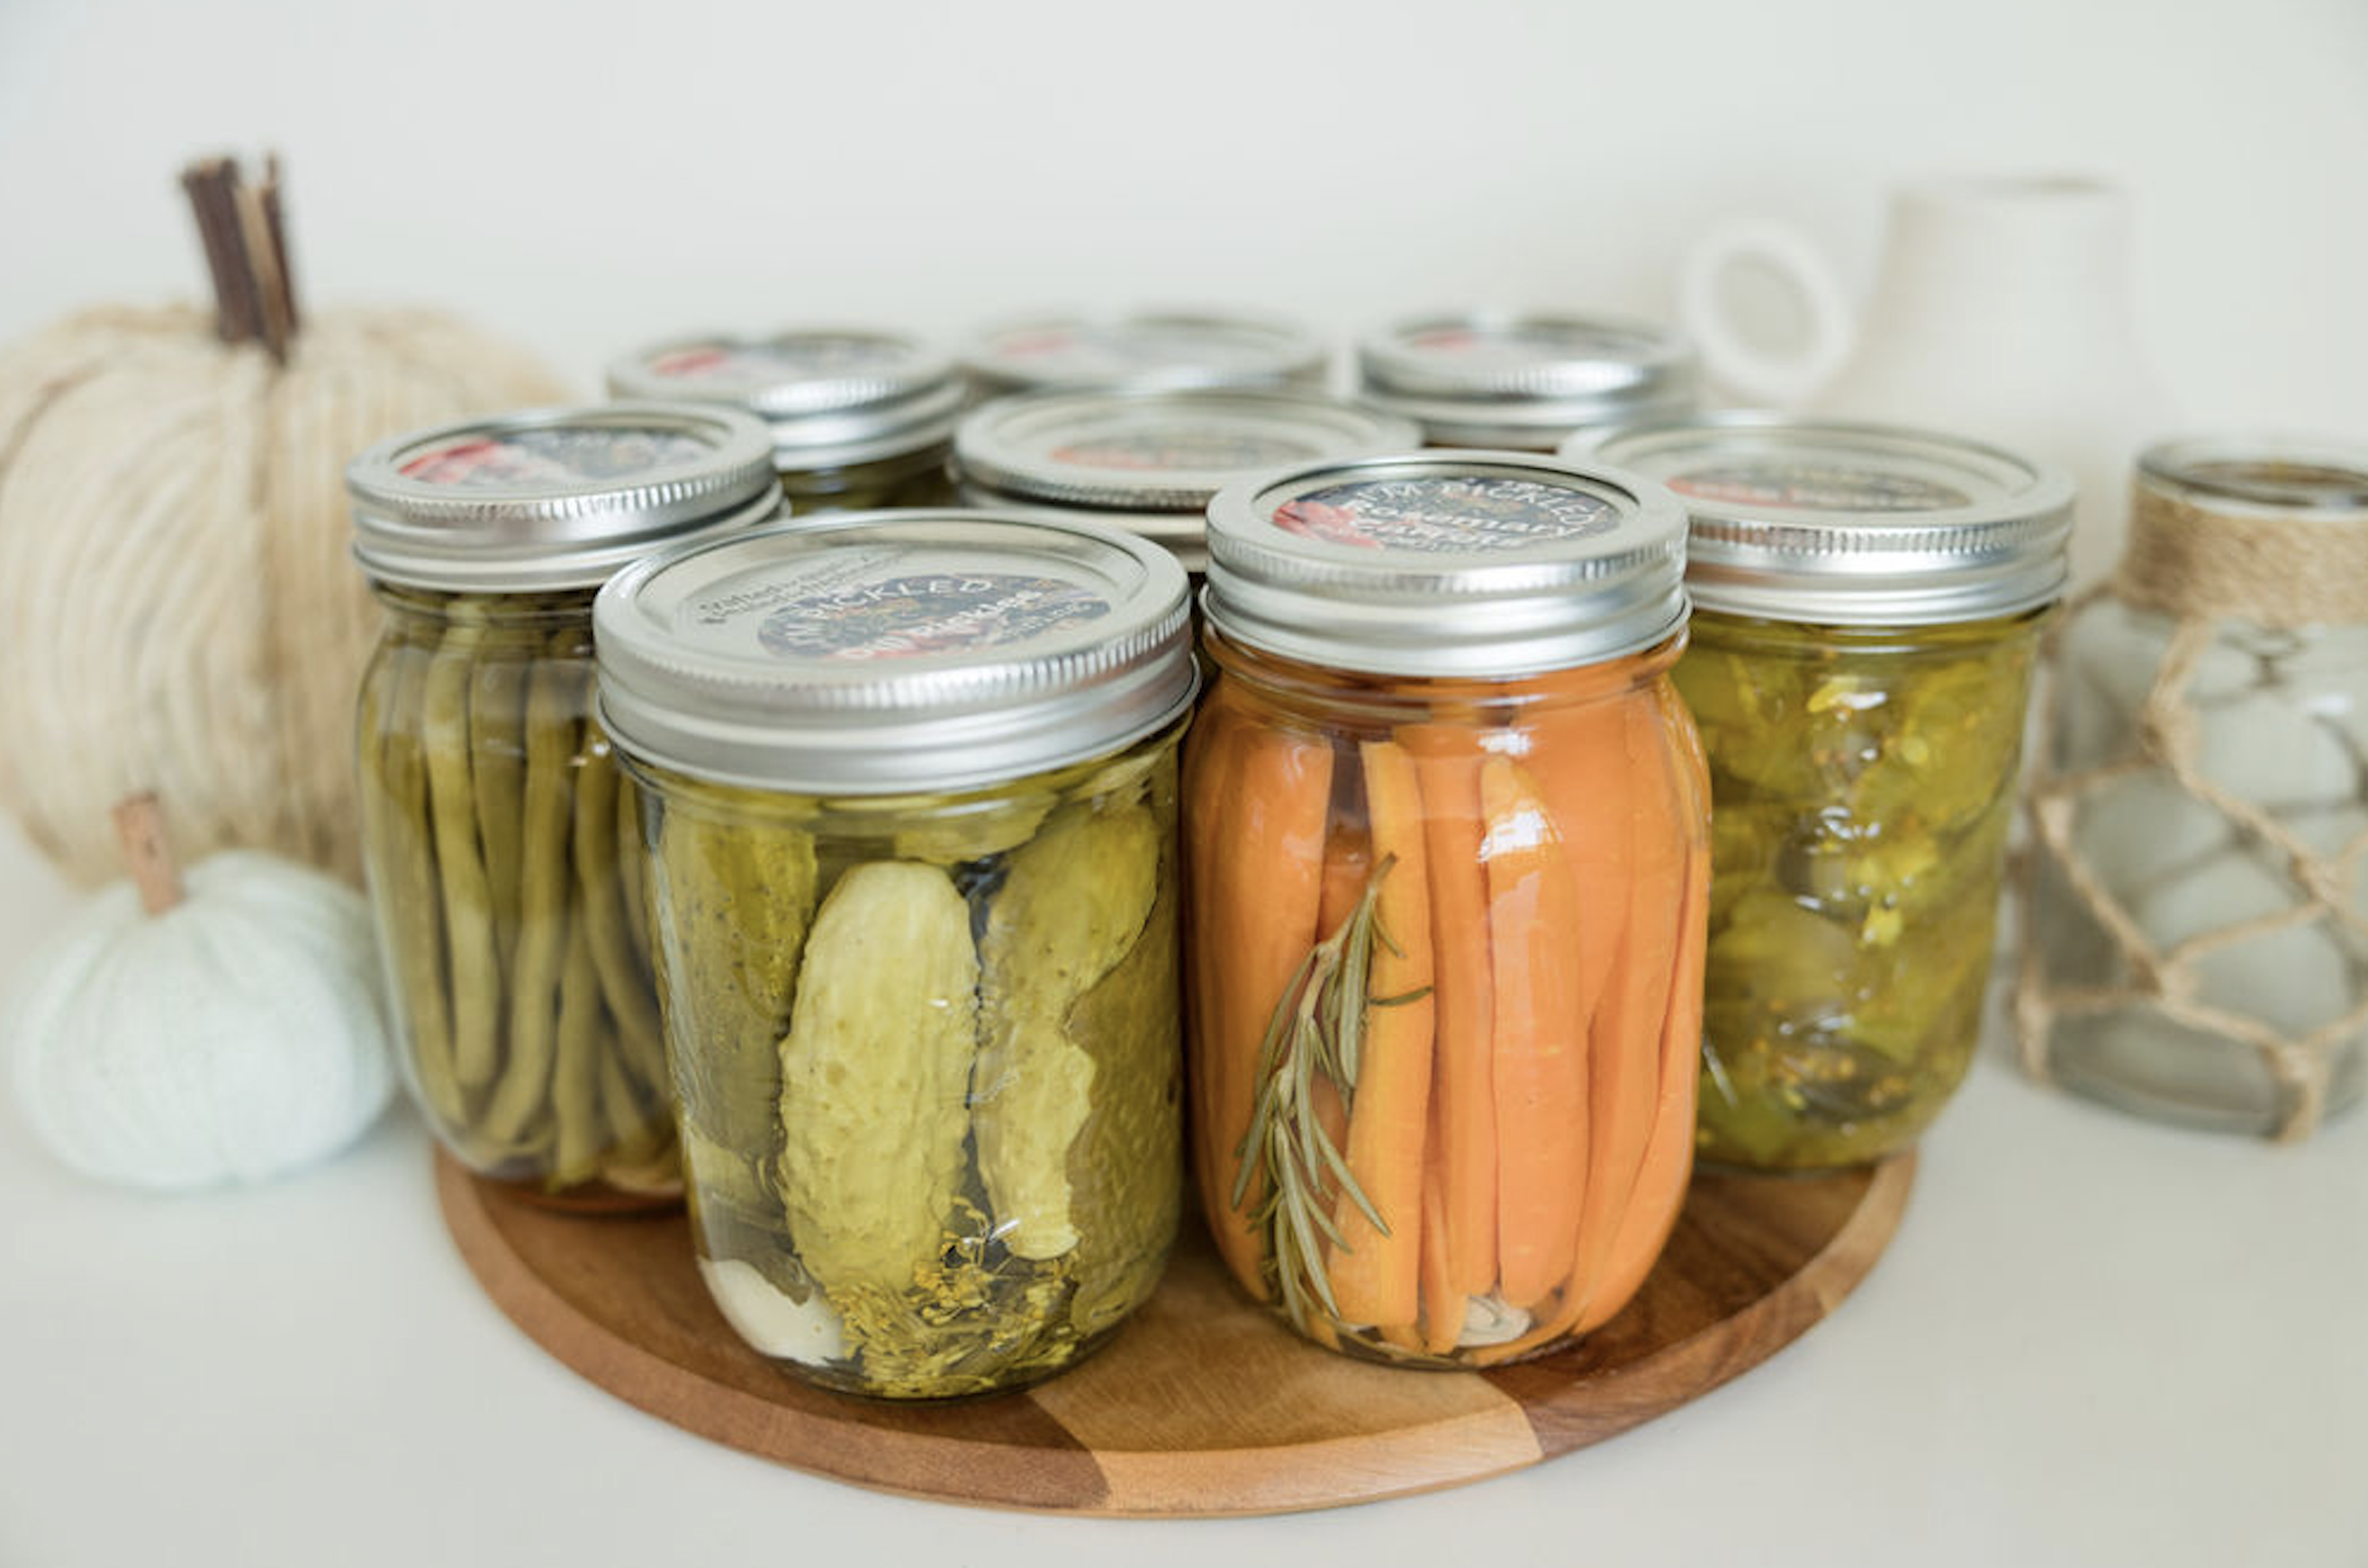 IM PICKLED best pickles in mission bc handmade pickles crafted locally fraser valley british columbia canada 4